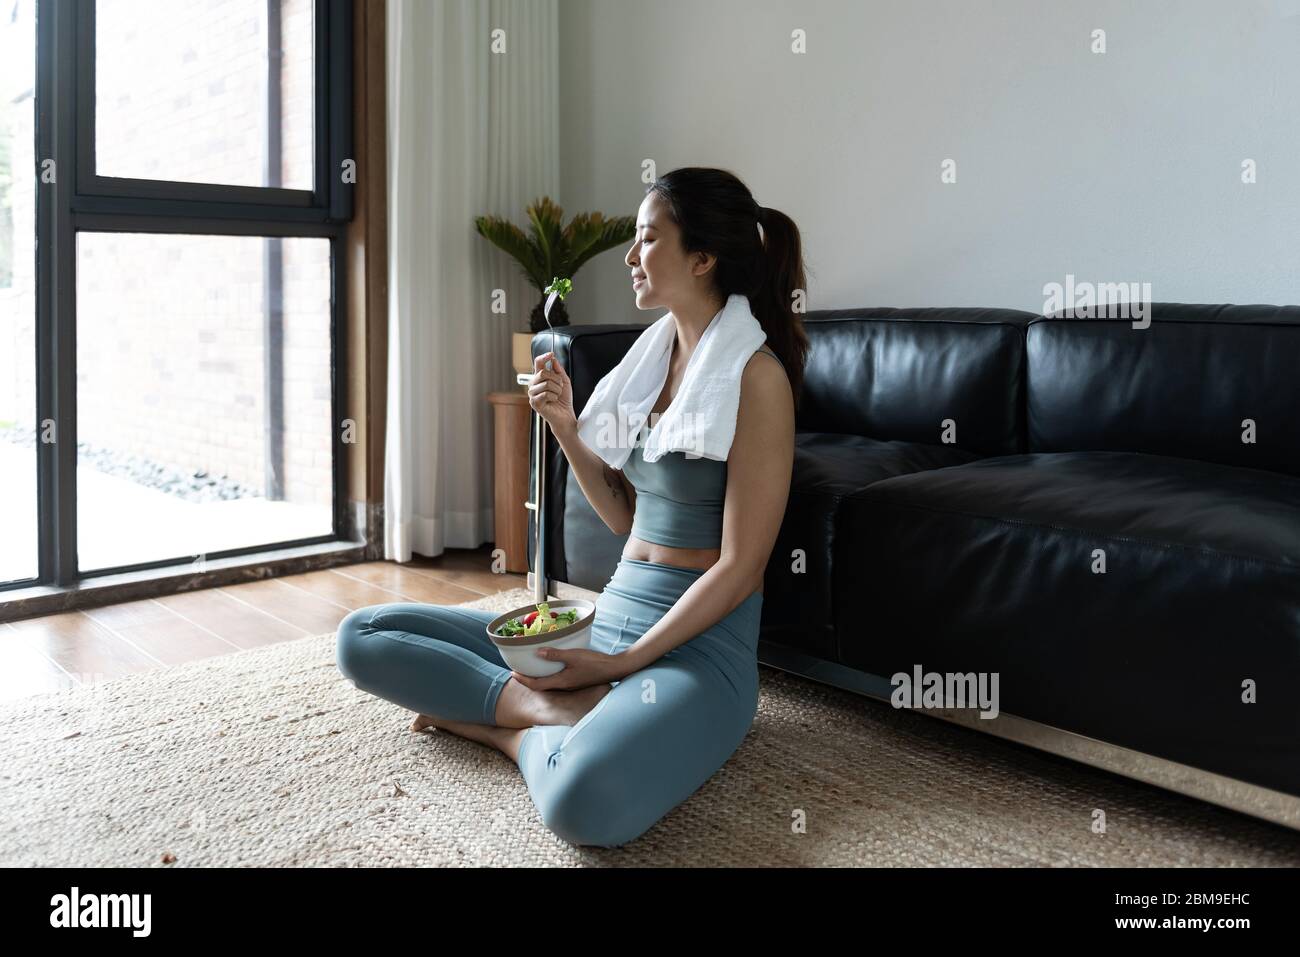 A young Asian woman eating a healthy vegetable salad in the living room Stock Photo